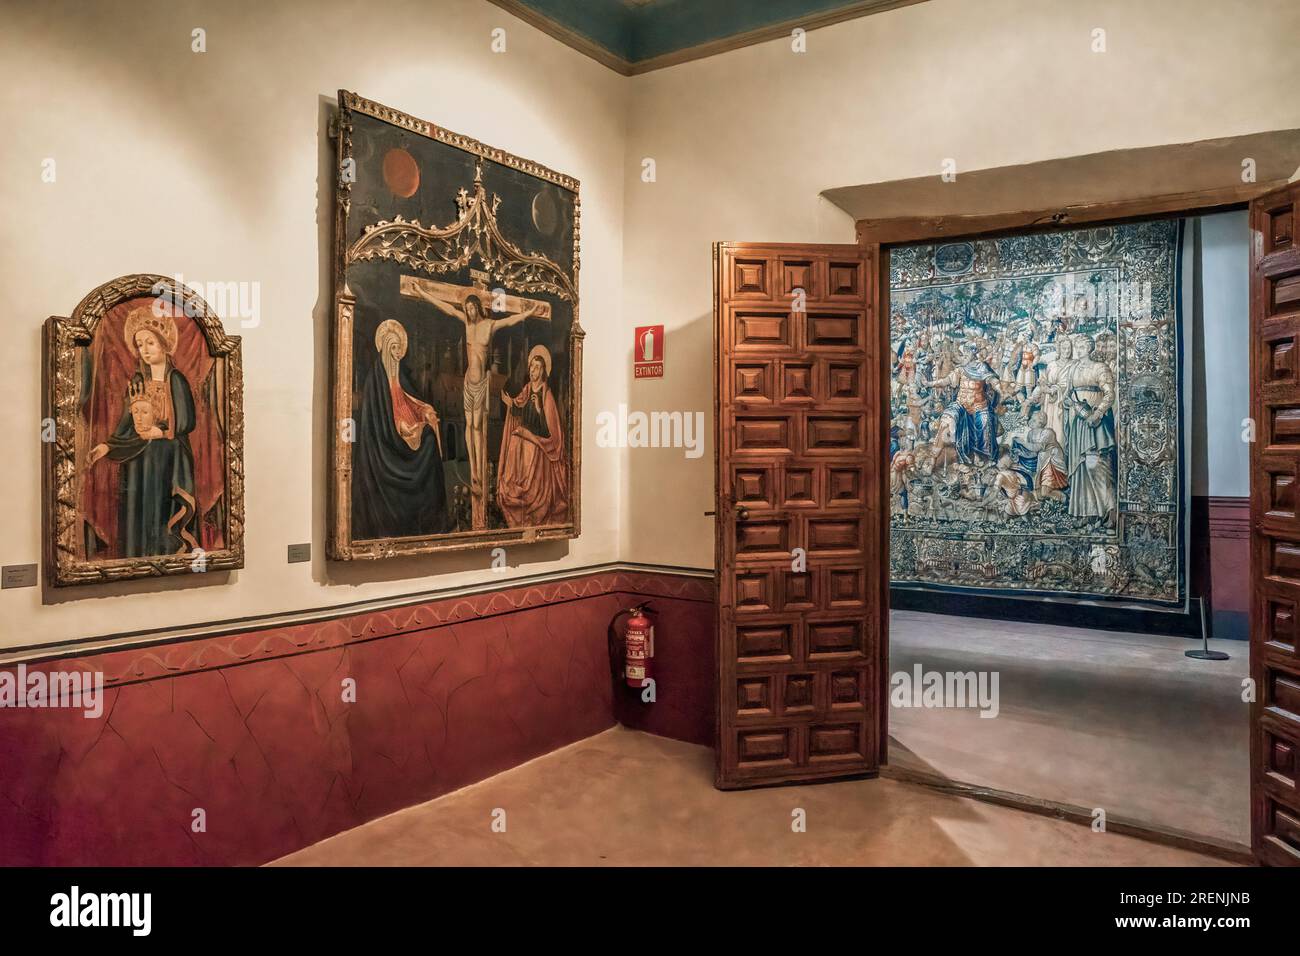 The Santa María Foundation restores tapestries from the Diocesan Museum of Albarracín, episcopal palace of the 18th century, Teruel, Aragon, Spain. Stock Photo